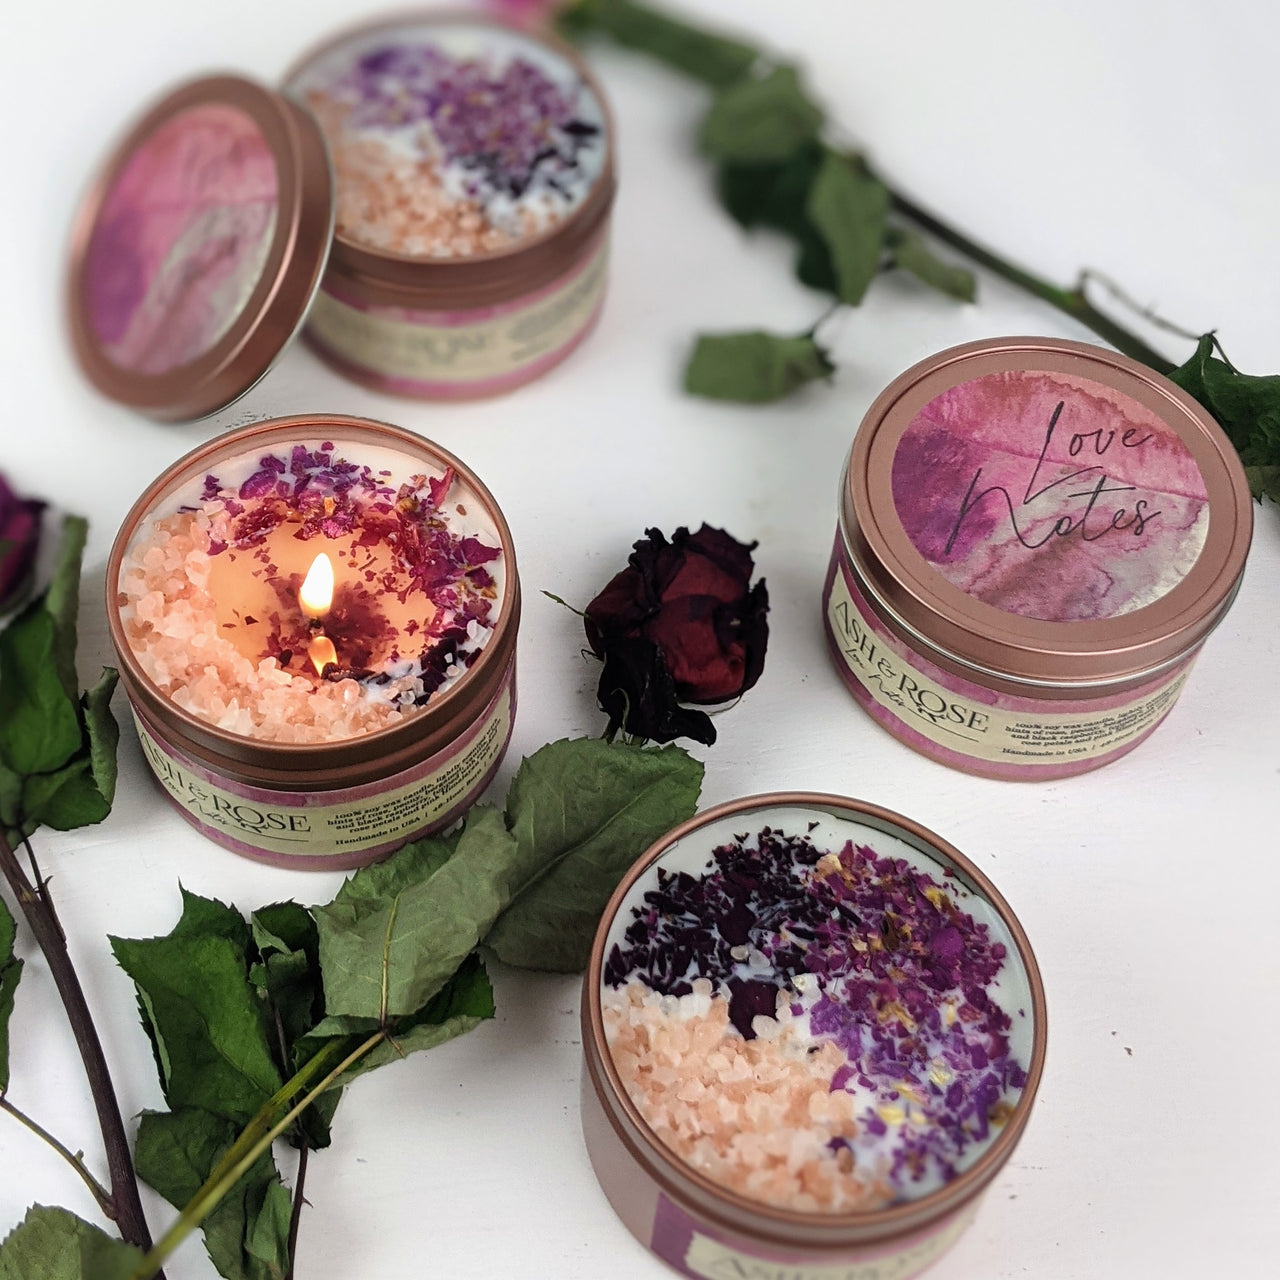 Ash & Rose Love Notes Loaded 8 oz. Tin Candle with Rose Petals and Pink Salt